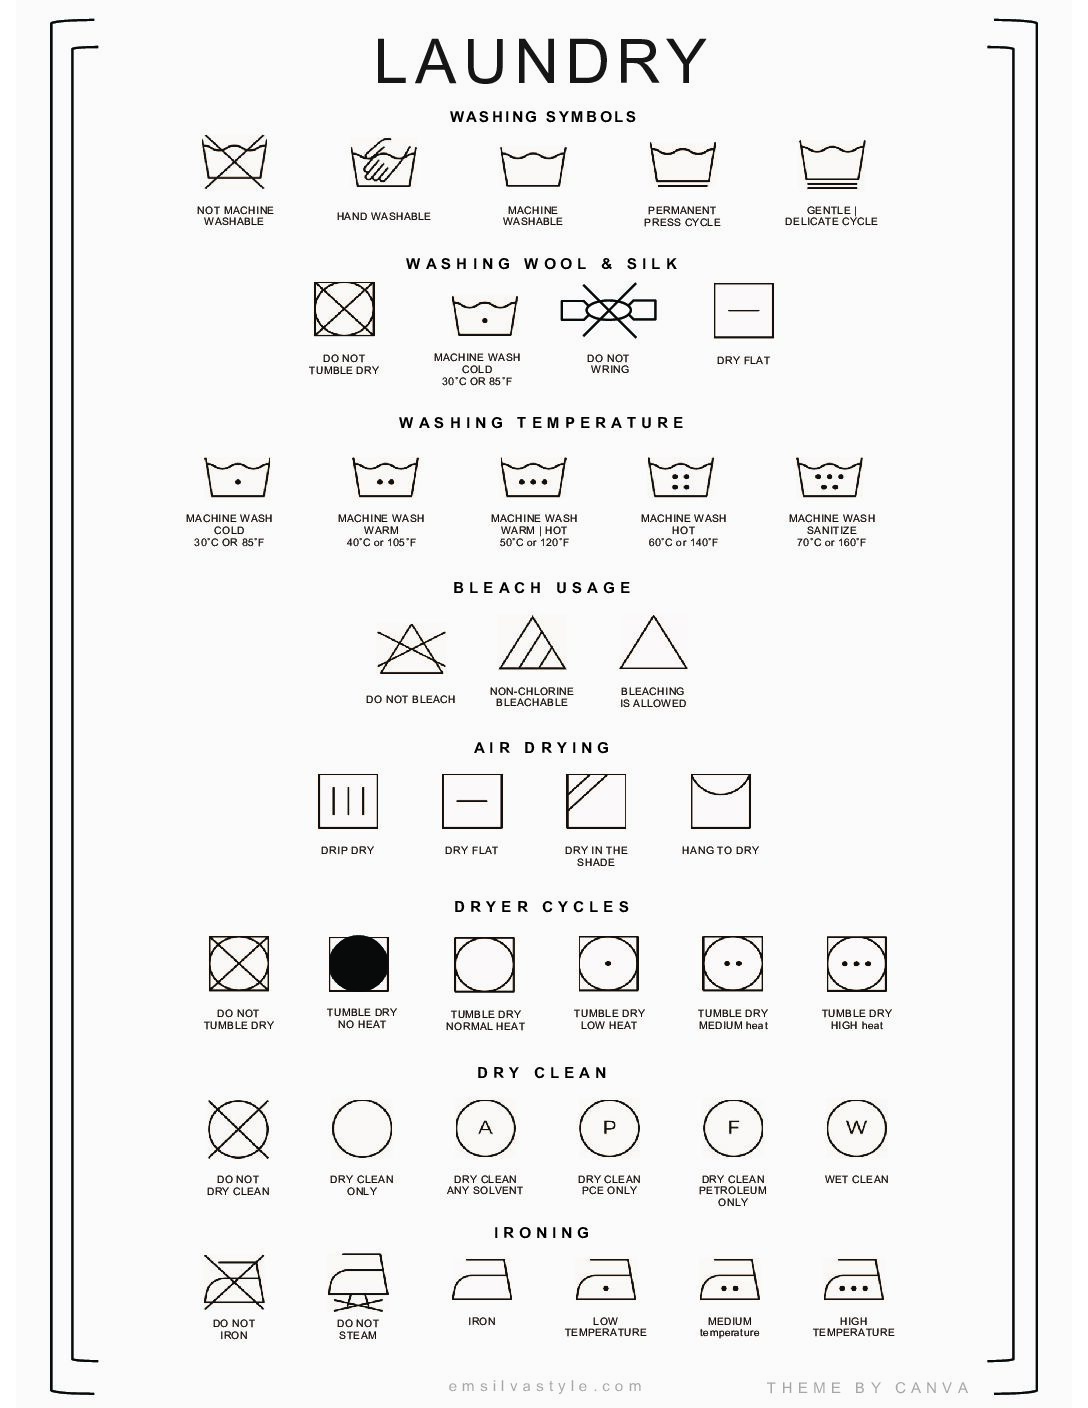 Visual guide: Laundry symbols reference sheet for easy identification and understanding of garment care instructions.